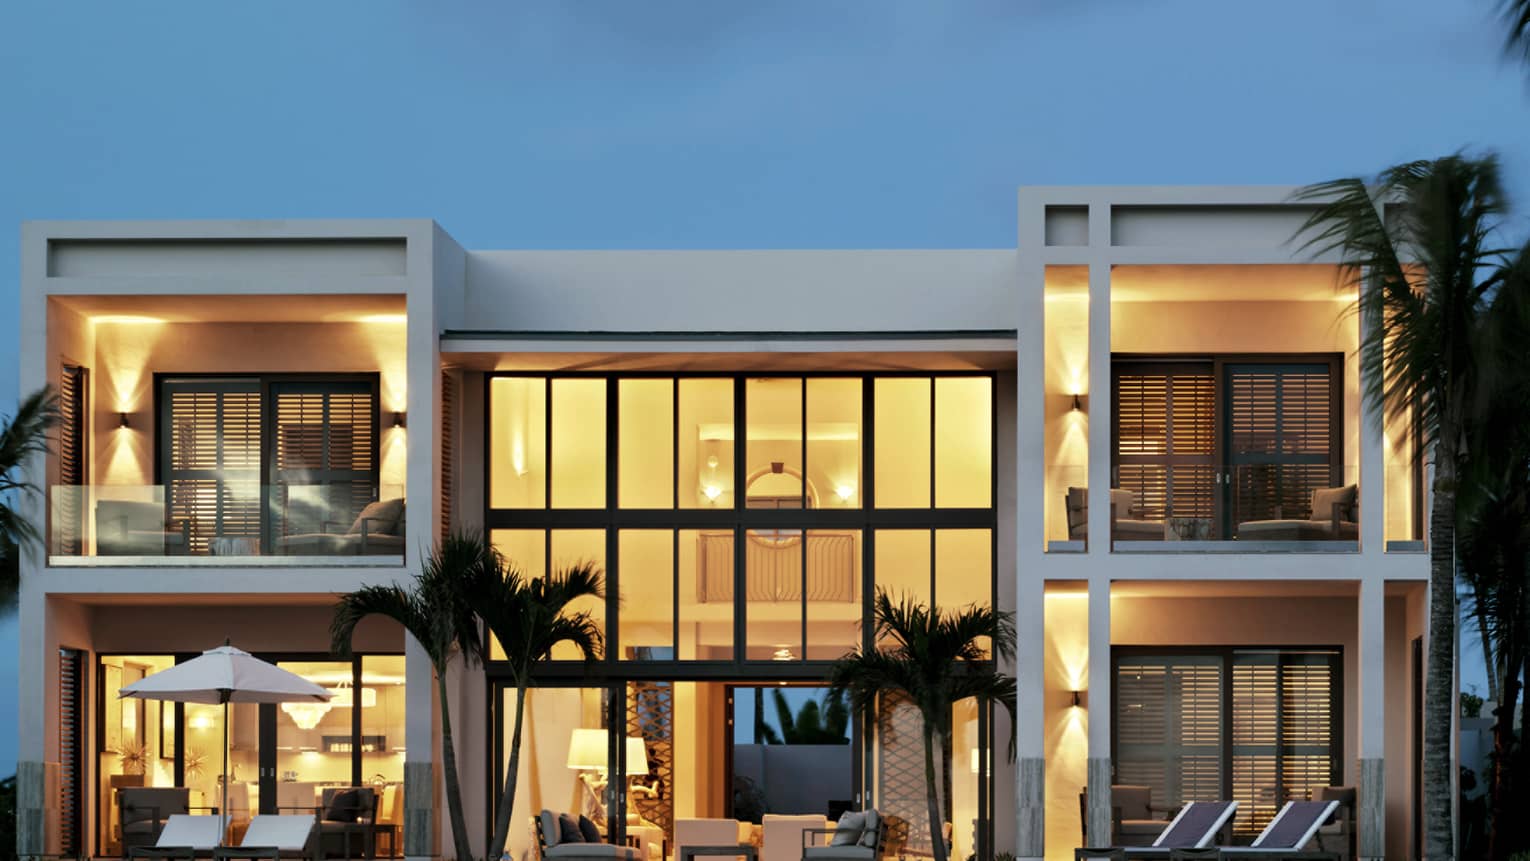 Exterior view of five-bedroom, white beachfront villa at dusk, two storeys with floor-to-ceiling illuminated windows